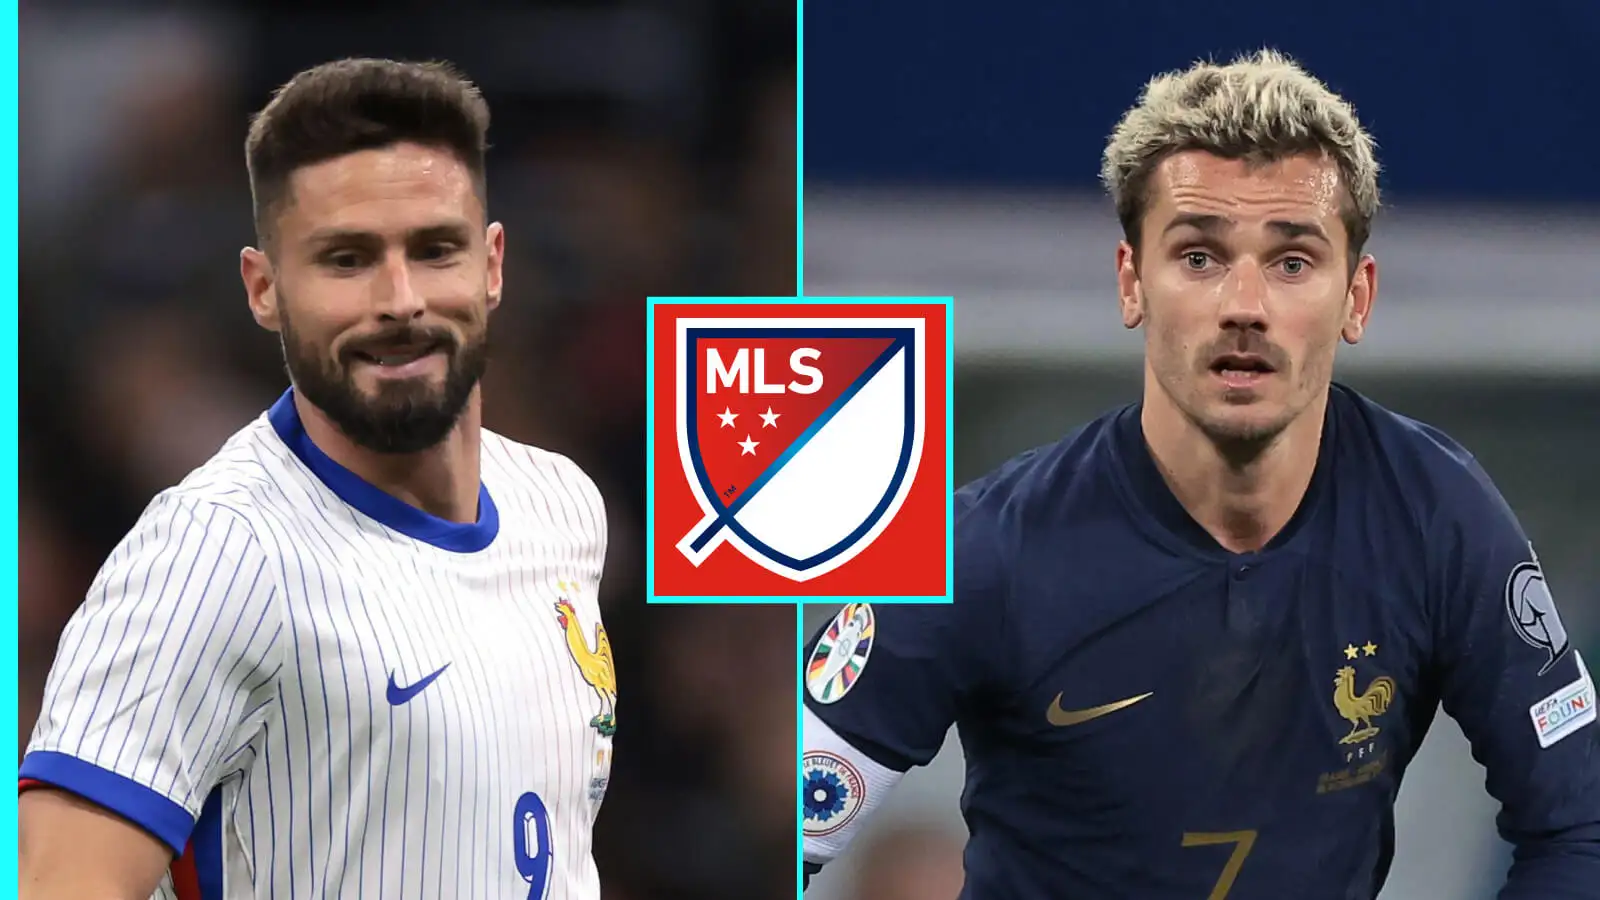 Olivier Giroud is one sexy Hollywood leading man but MLS needs Griezmann